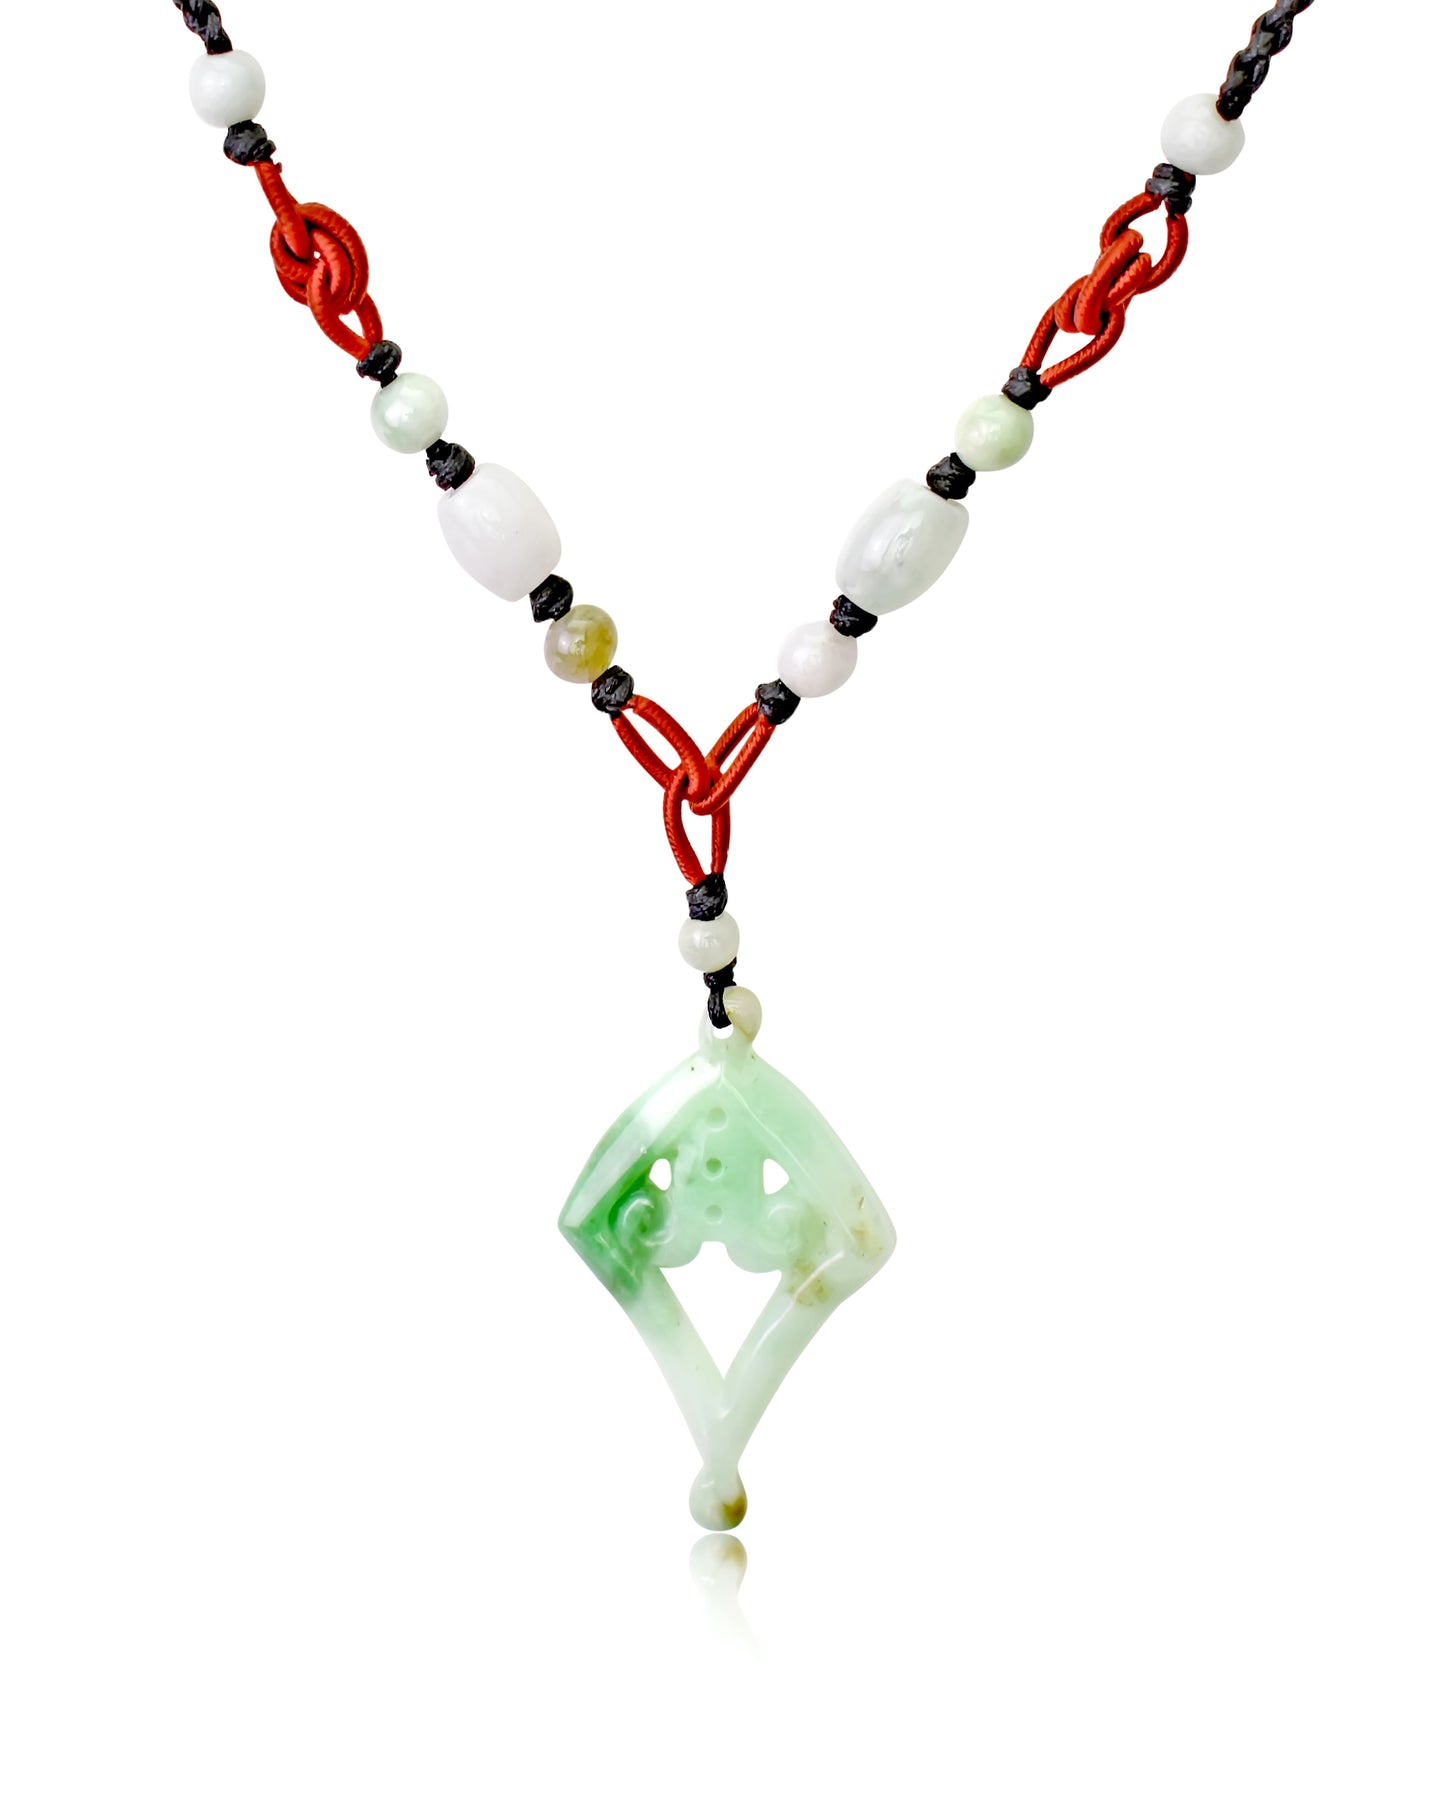 Be Uniquely You with Diamond and Lace Jade Necklace Pendant made with Black Cord